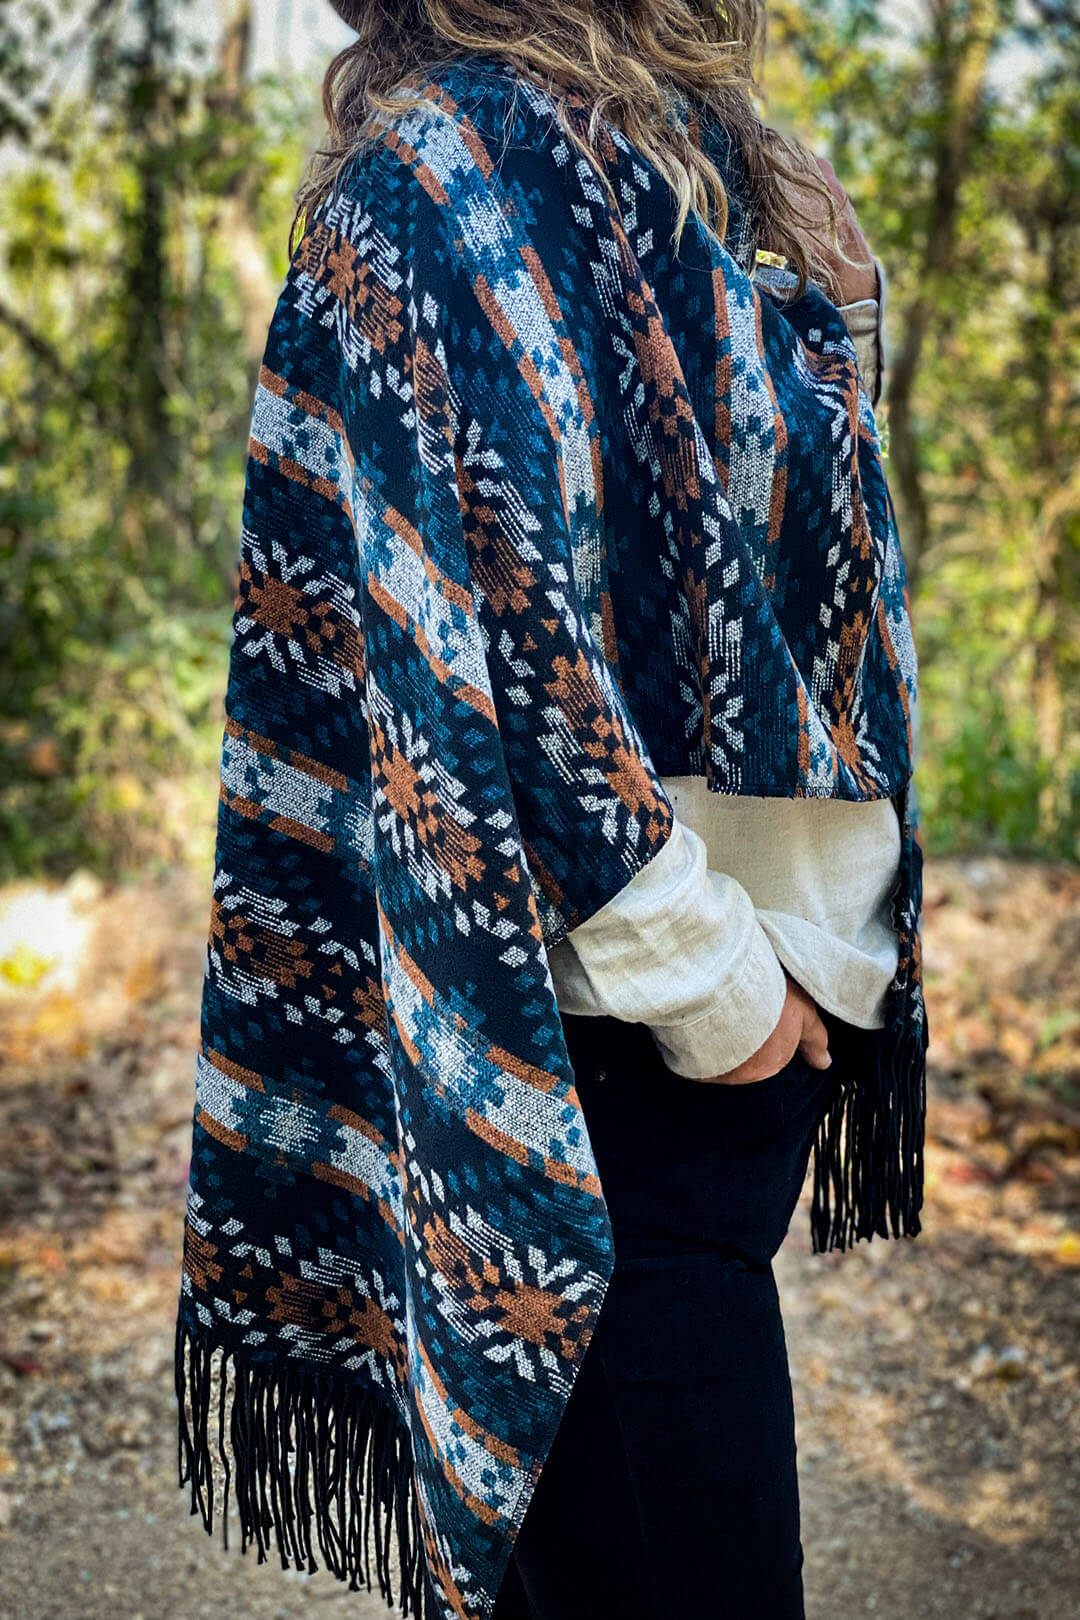 Picture showing detail of poncho with aztec design and fring on each side